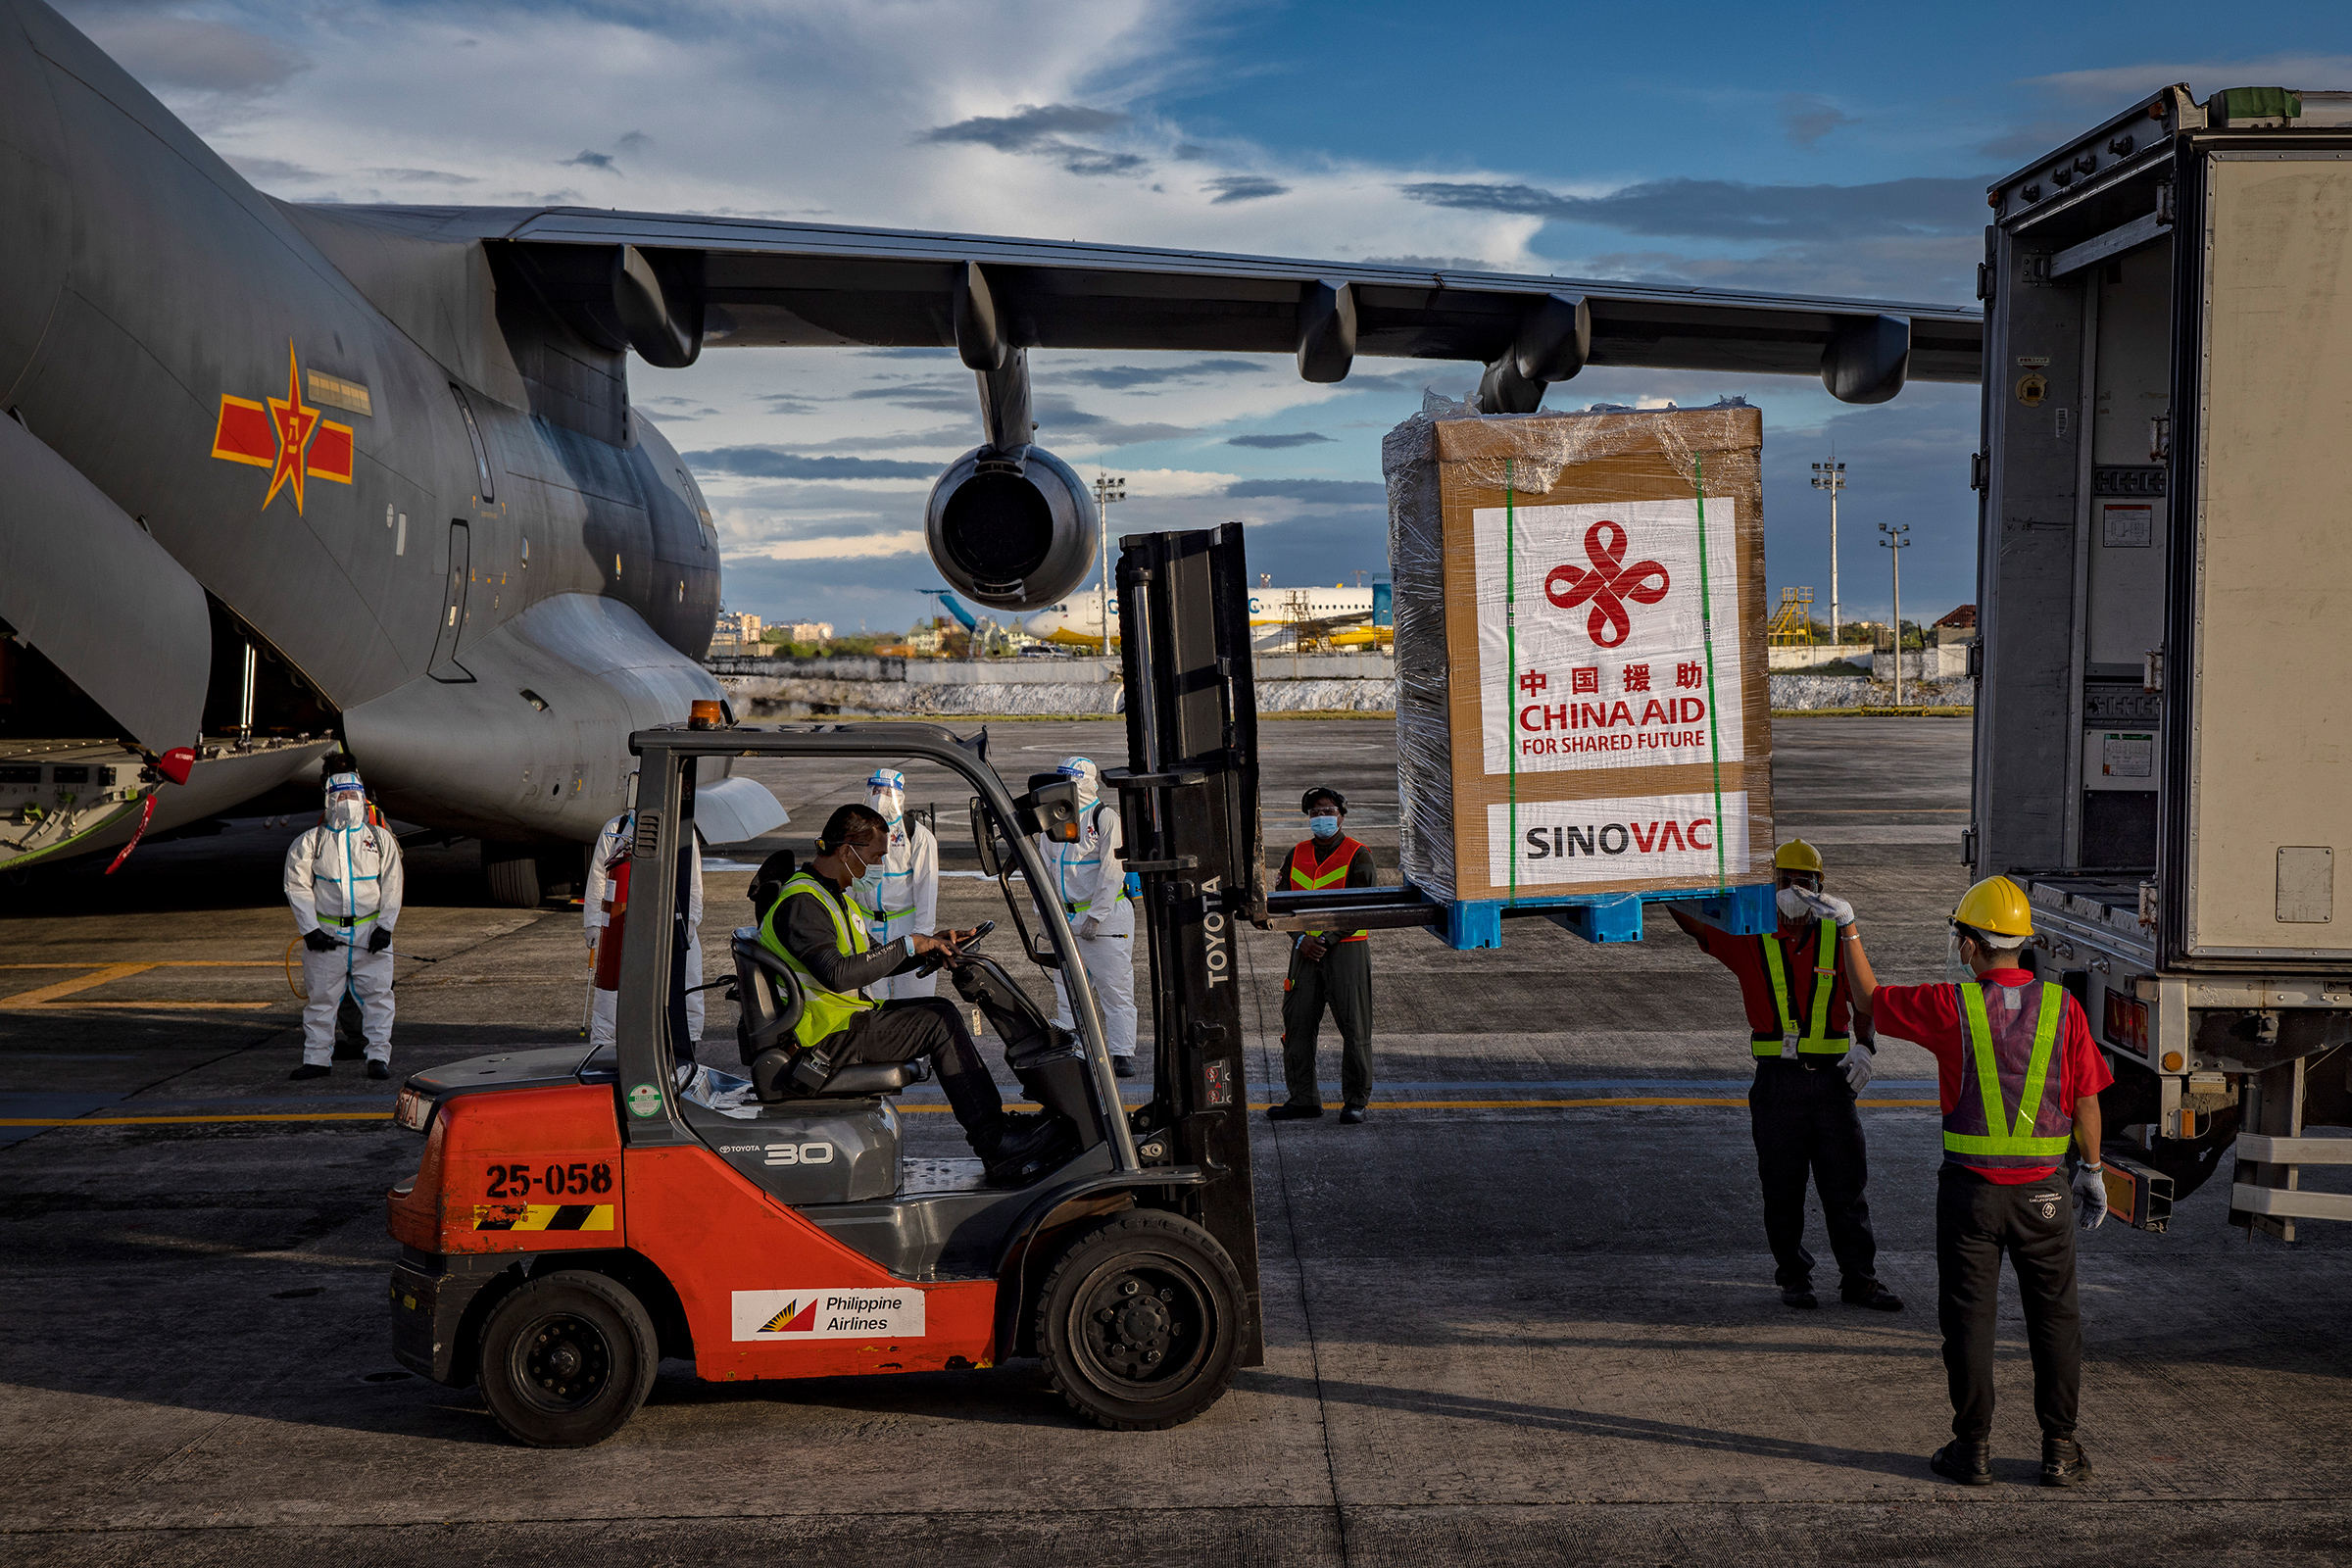 A crate containing Sinovac Biotech COVID-19 vaccines is loaded into a truck upon arrival at Ninoy Aquino International Airport in Manila on Feb. 28. Duterte witnessed the arrival of 600,000 doses donated by the Chinese government. (Ezra Acayan—Getty Images)